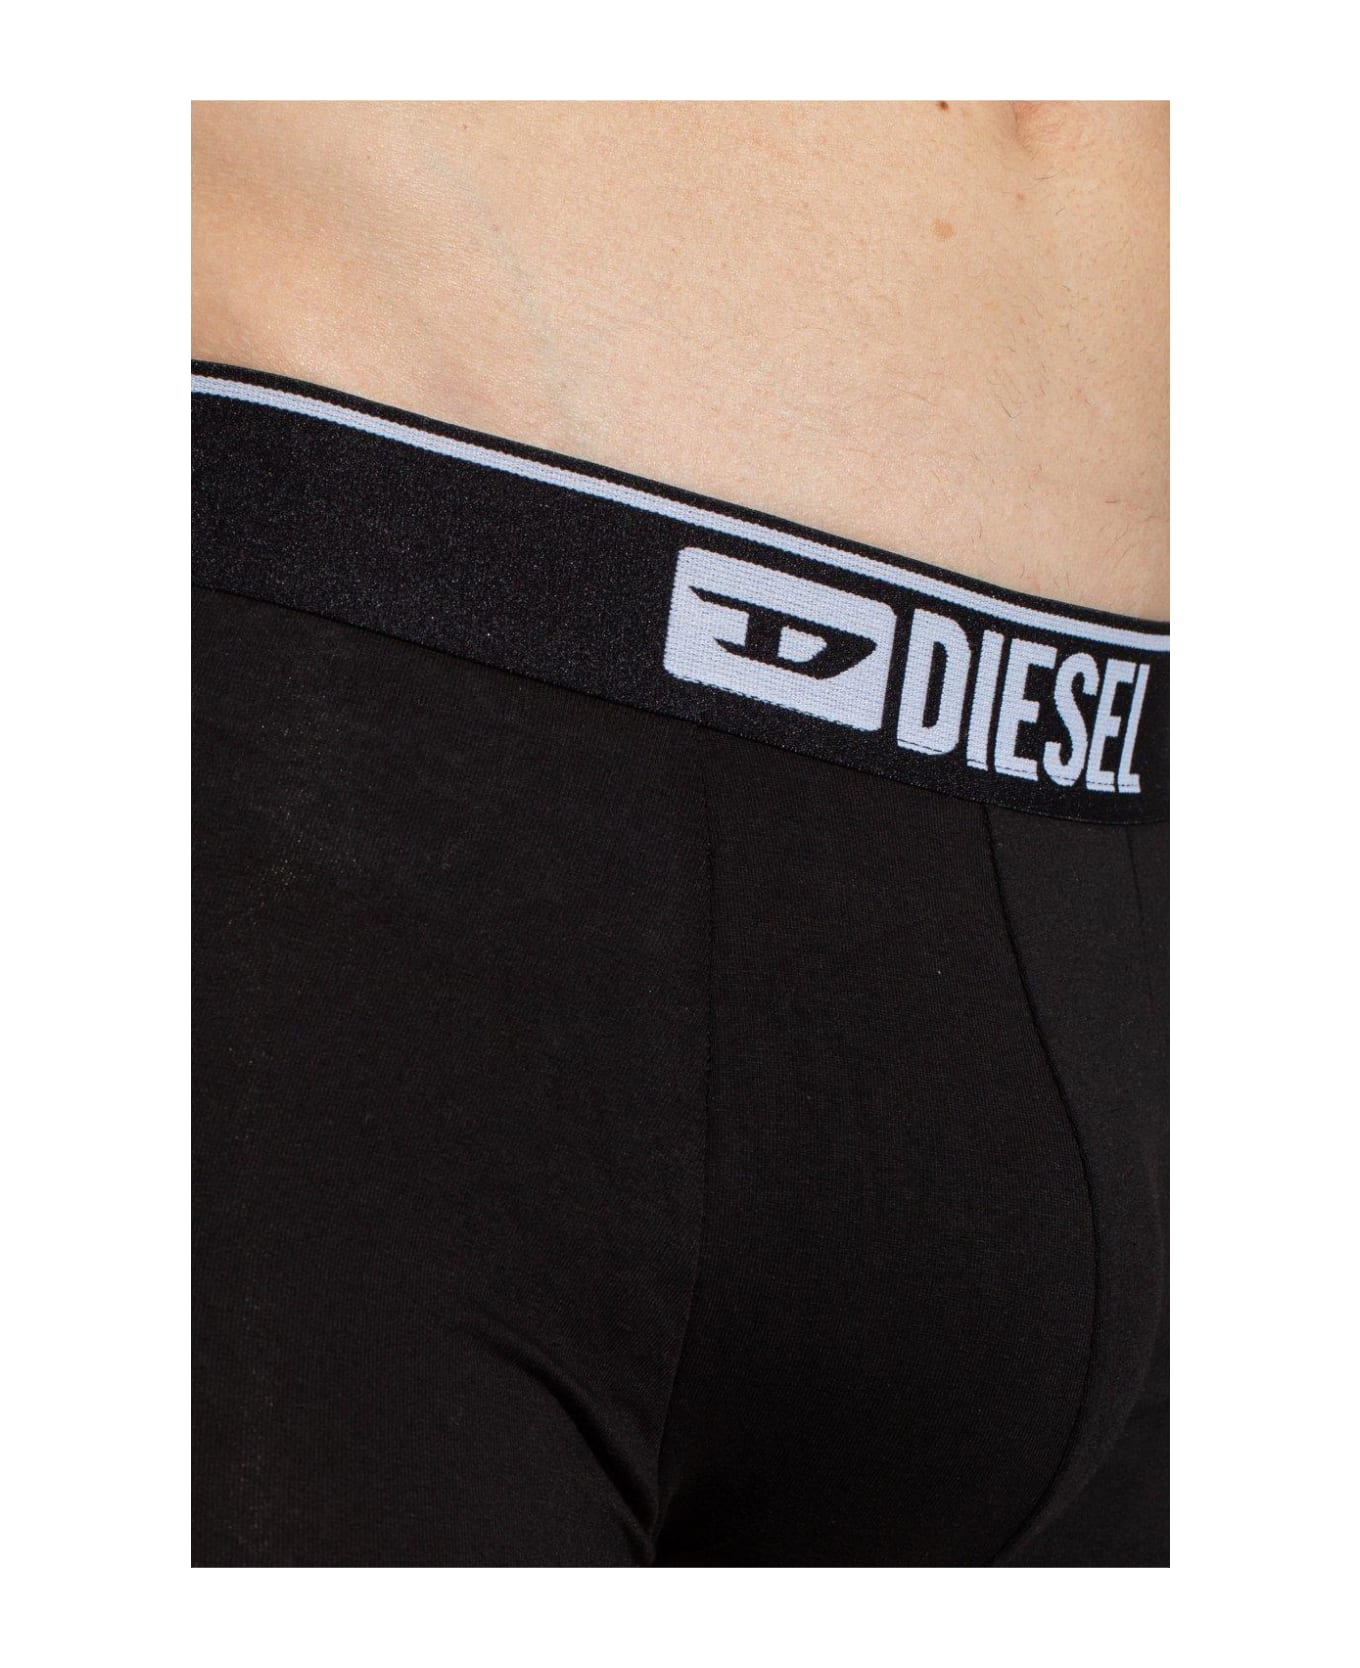 Diesel Umbx-damien Three-pack Logo-embroidered Boxers Set - MultiColour